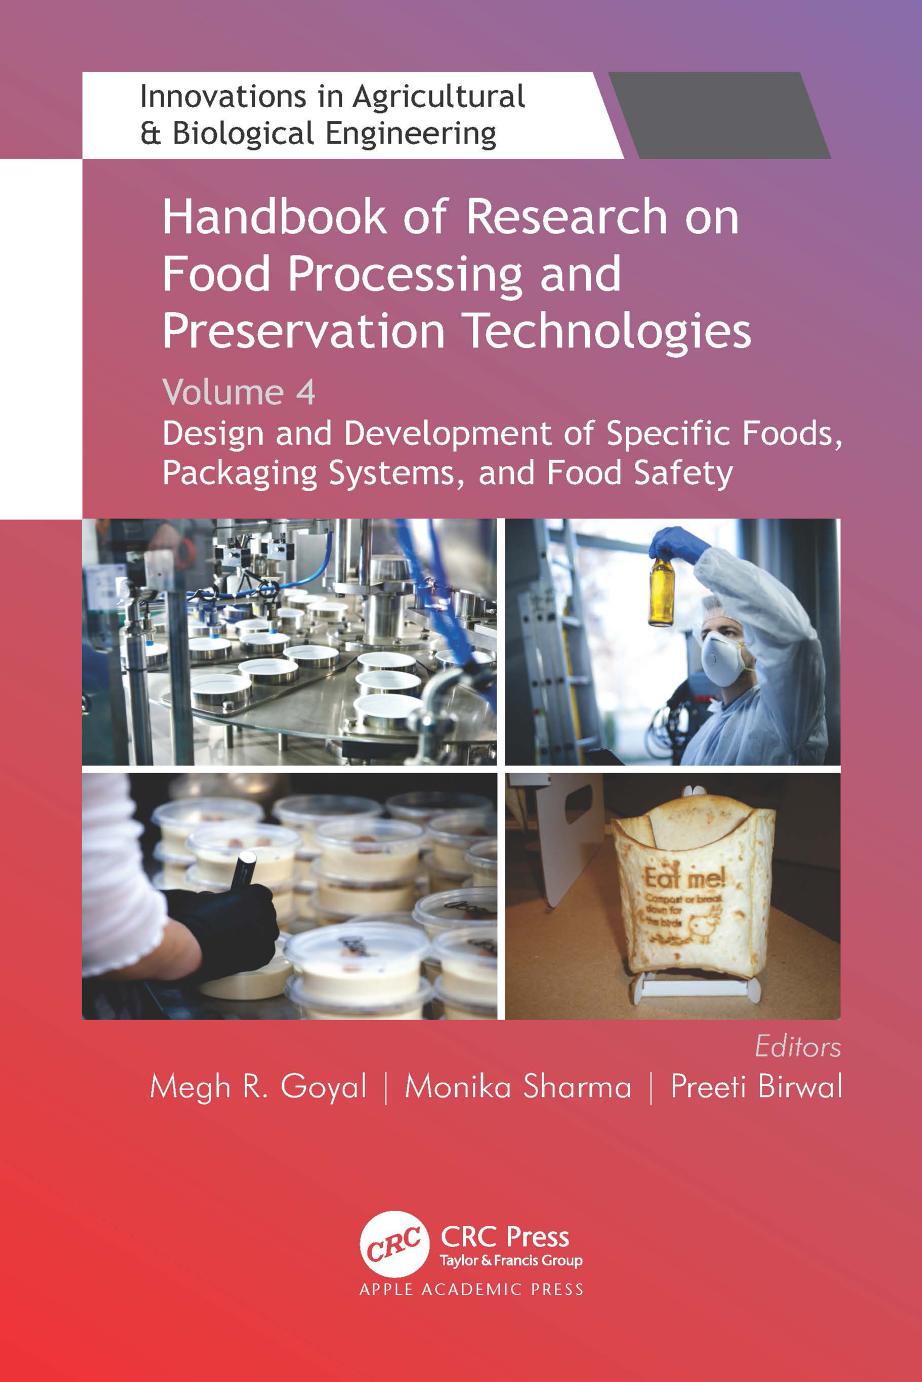 Handbook of Research on Food Processing and Preservation Technologies, Volume 4: Design and Development of Specific Foods, Packaging Systems, and Food Safety